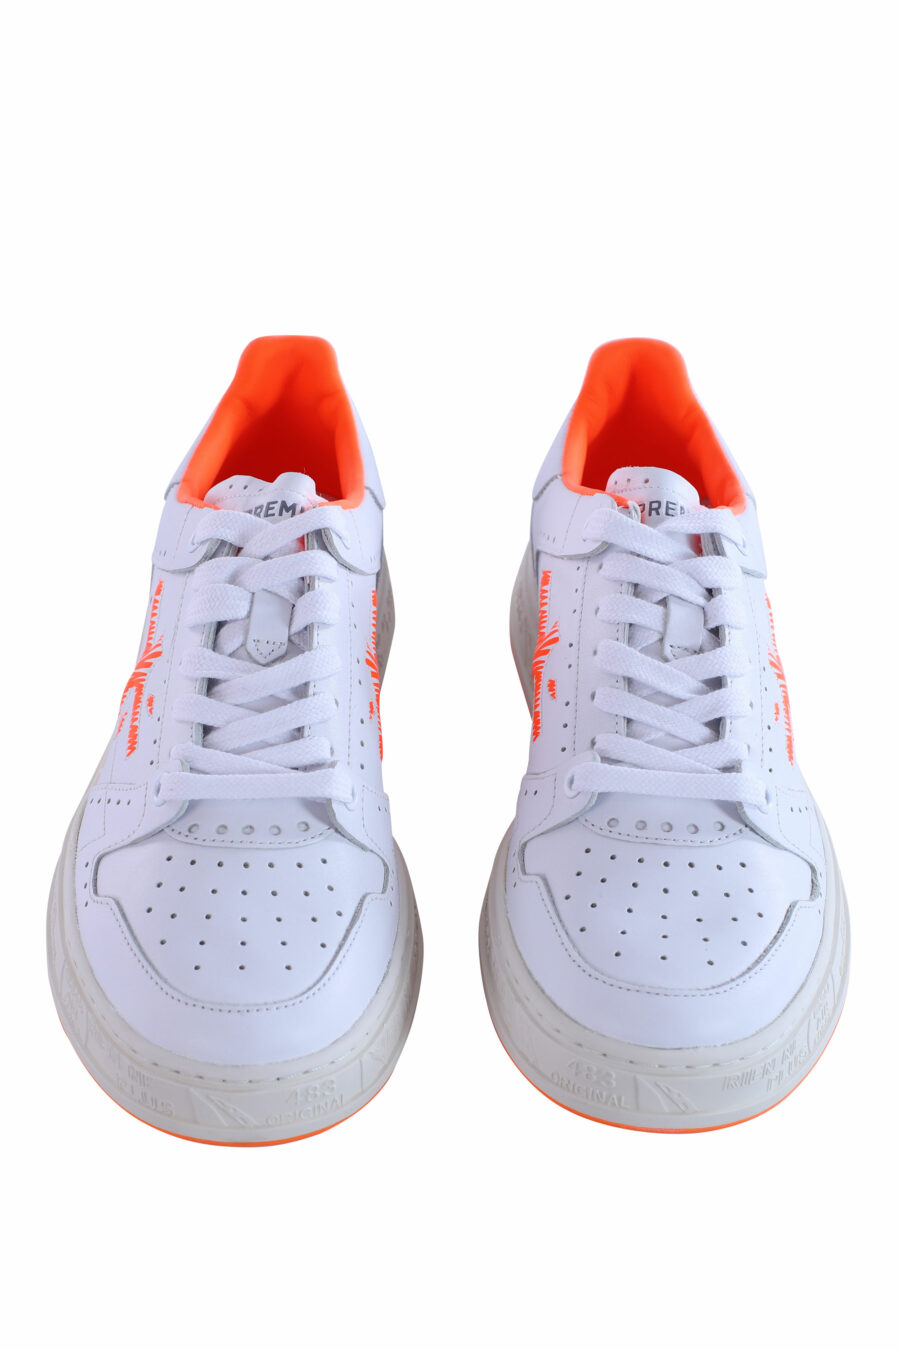 White trainers with orange "quinn 6302" - IMG 2998